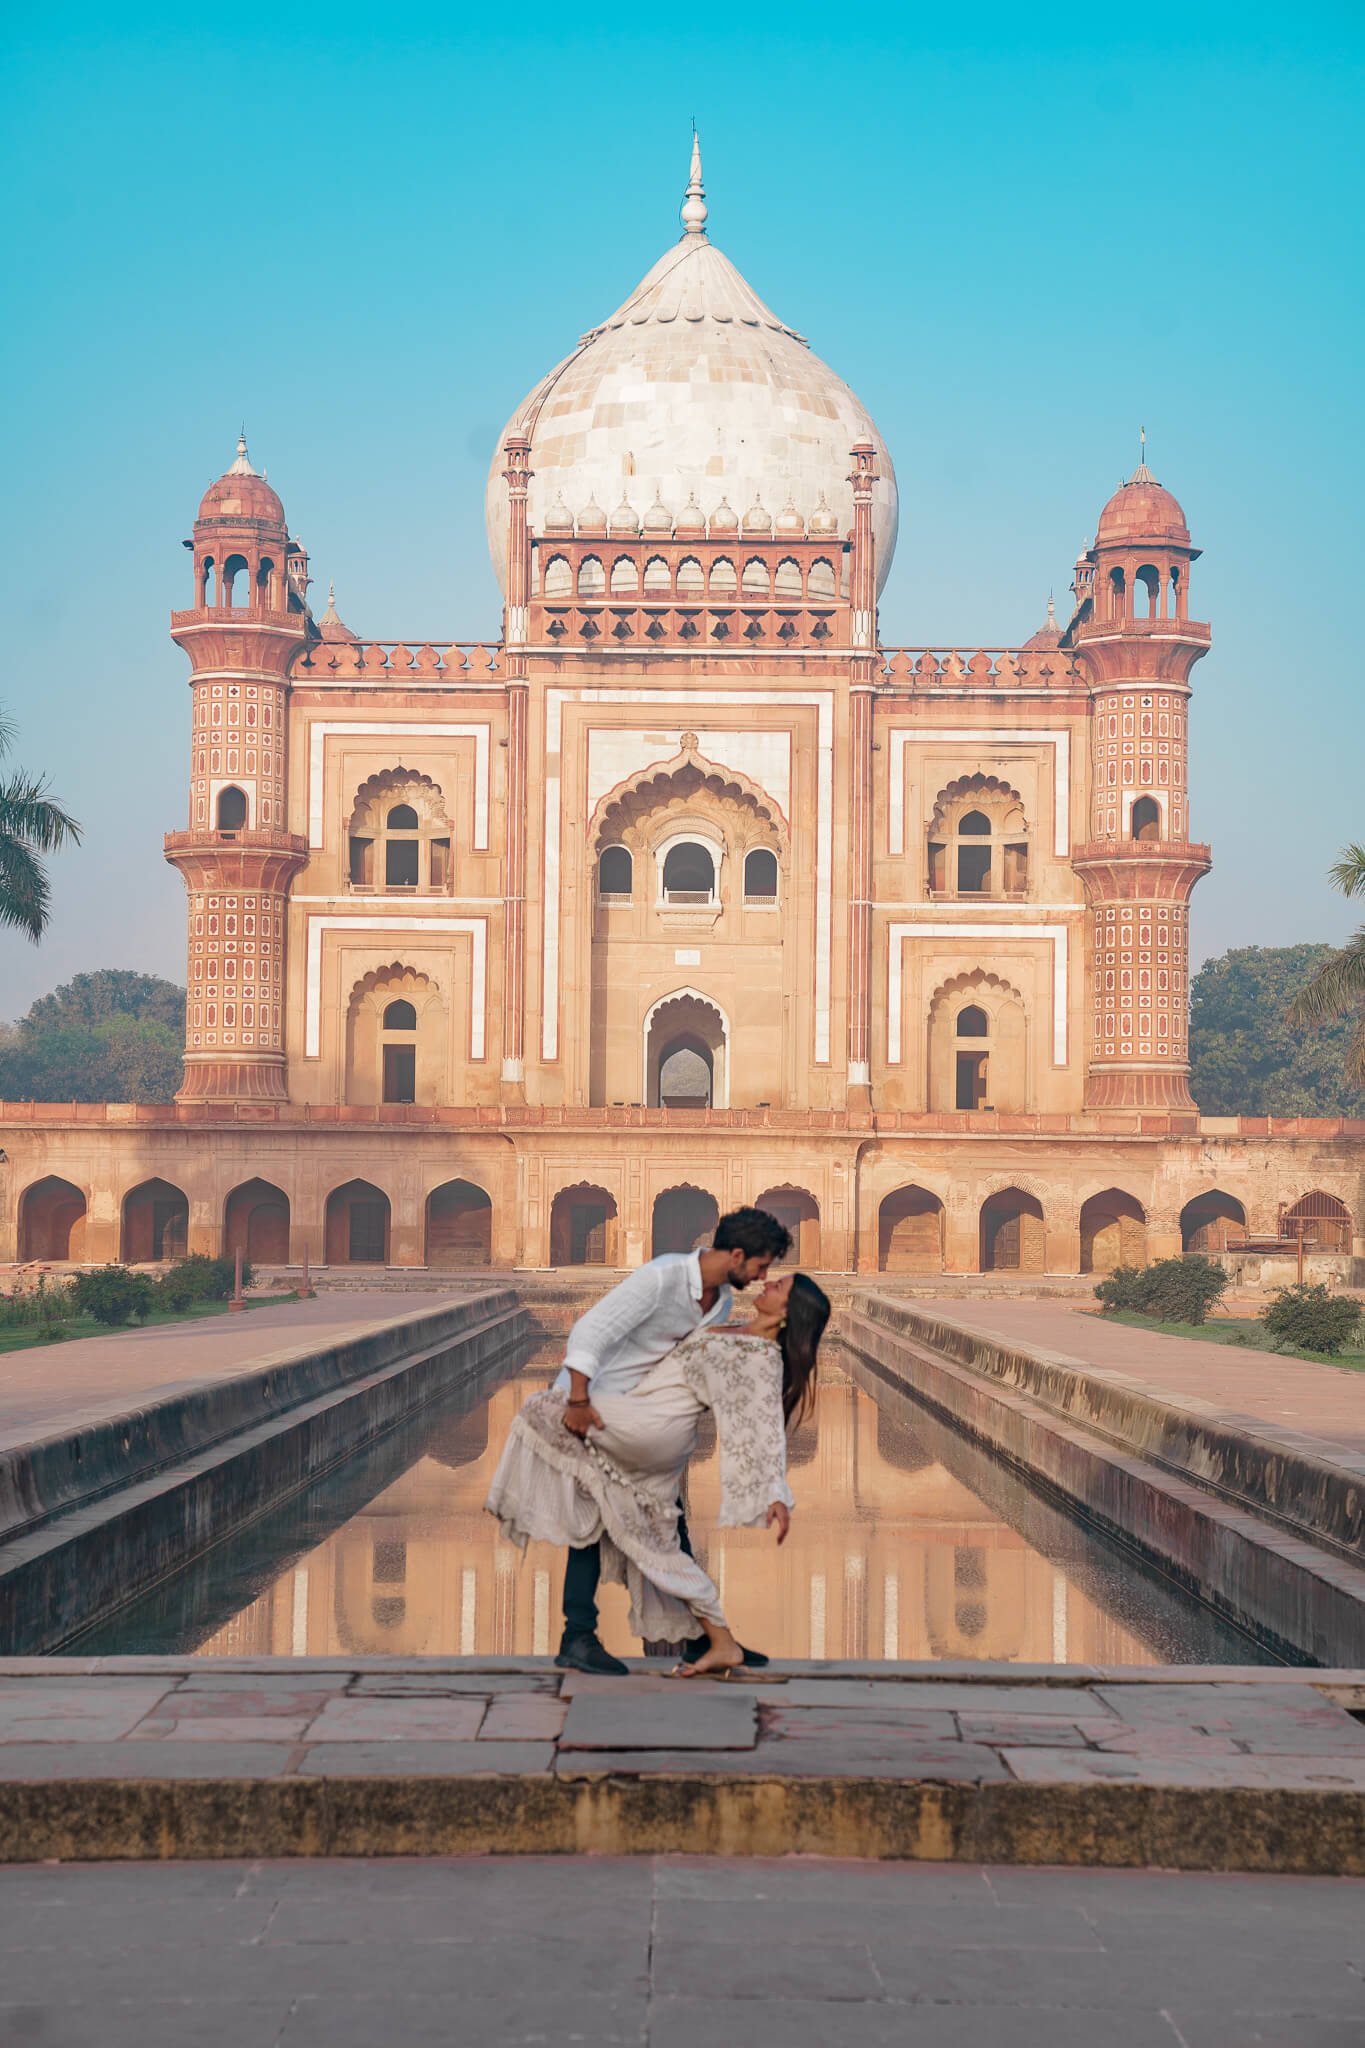 Safdarjung's tomb, how many days in Delhi is enough?